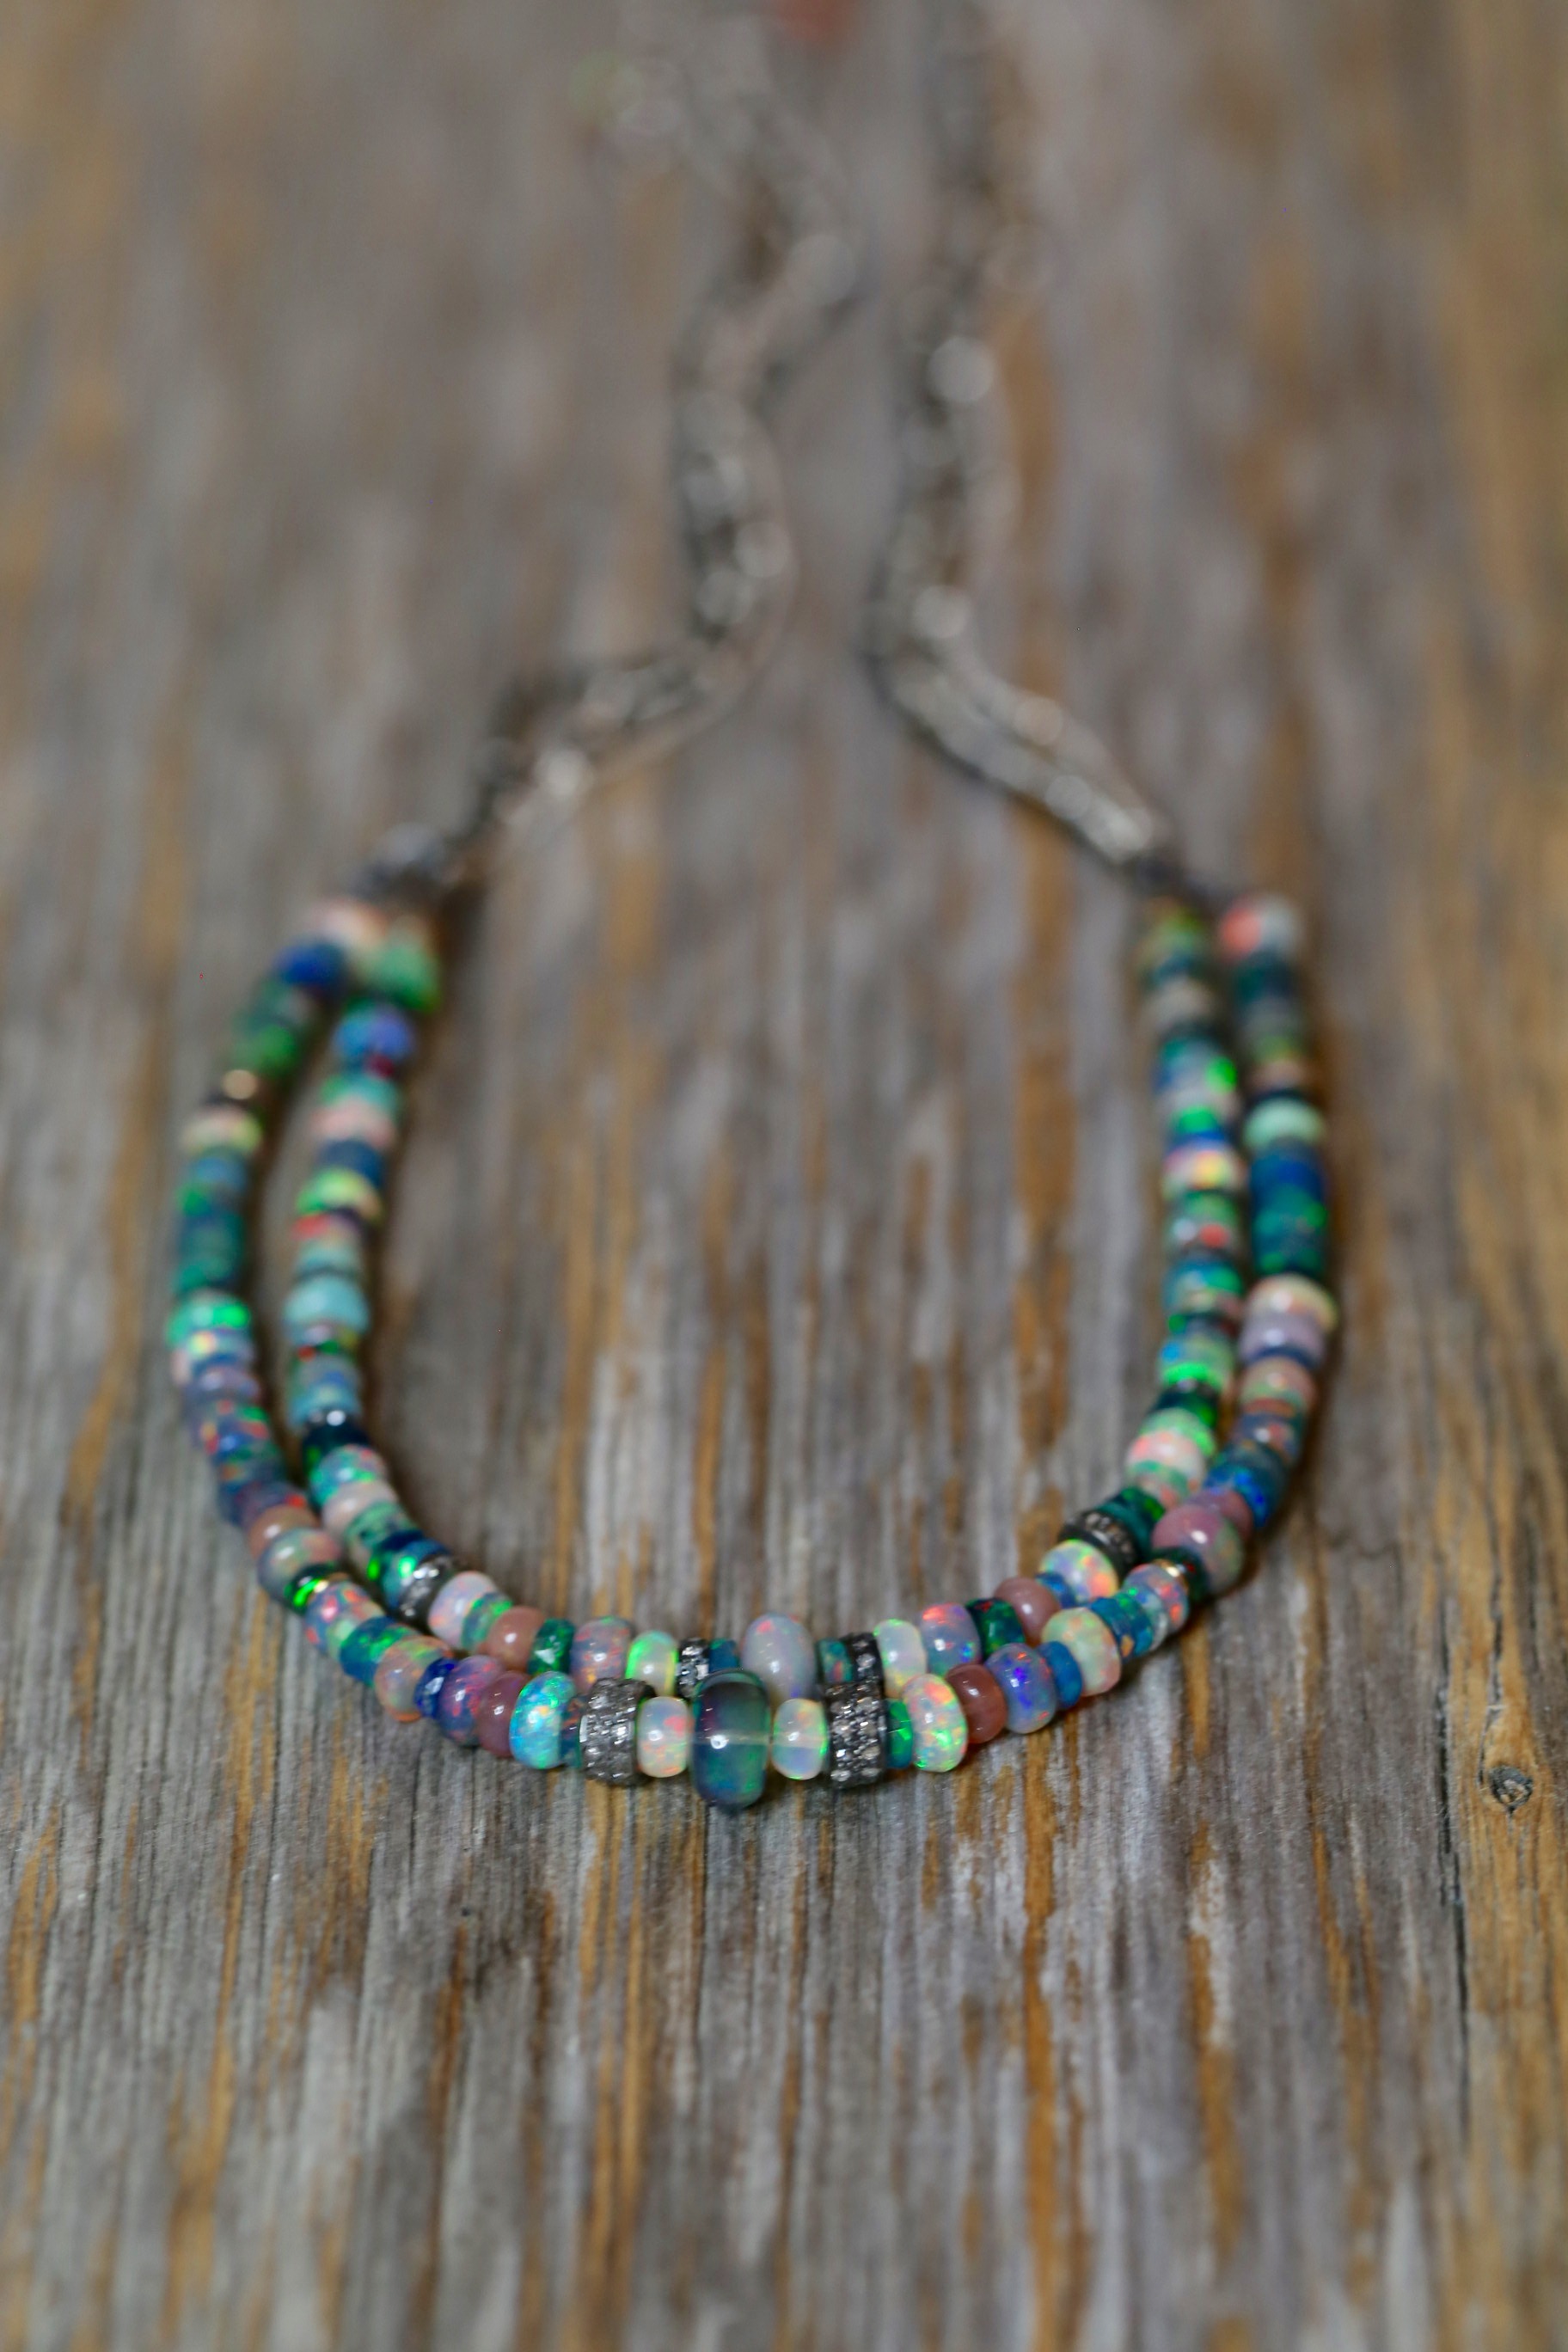 Opal and Pave Diamond Necklace from Nadean Designs.